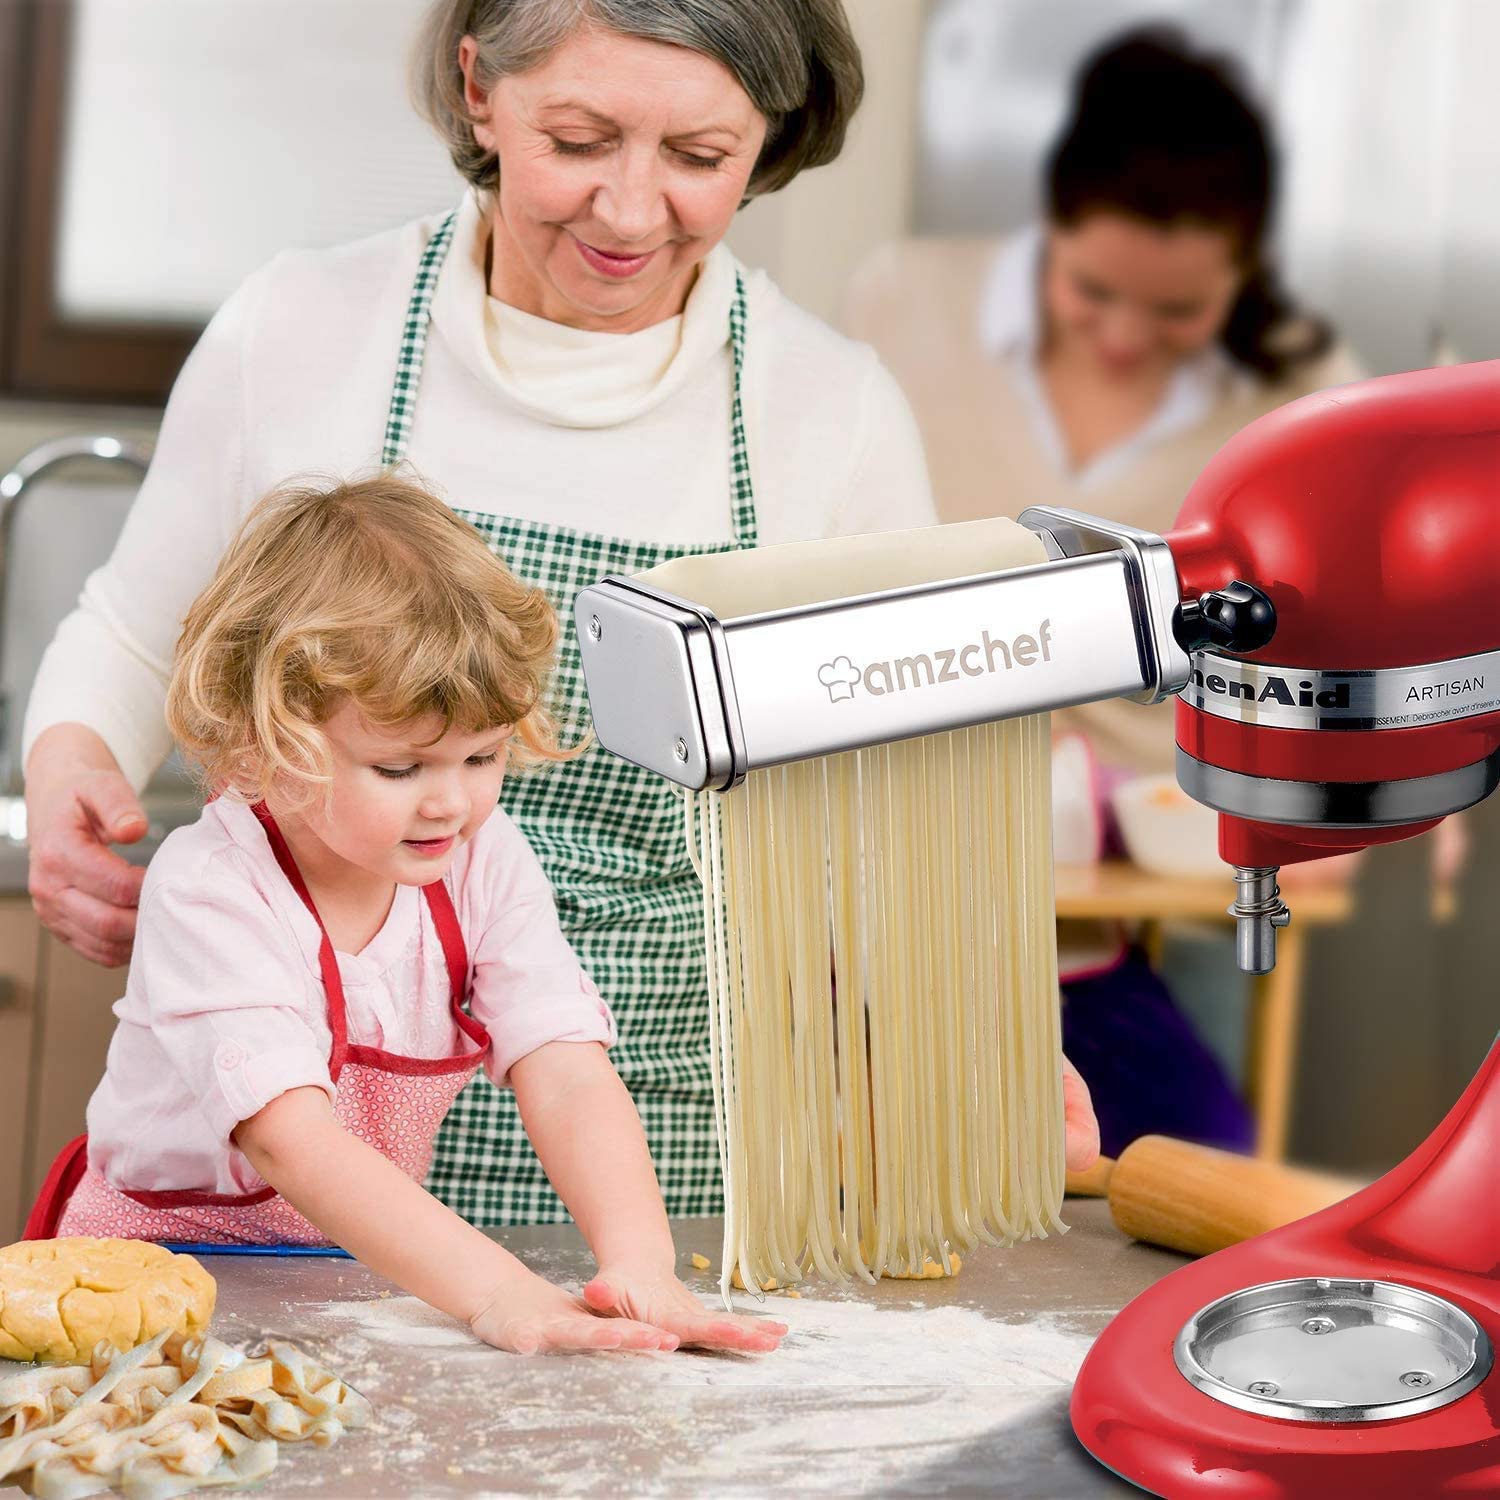 AirPro Pasta Maker Attachment, ZACME Washable Stainless Steel